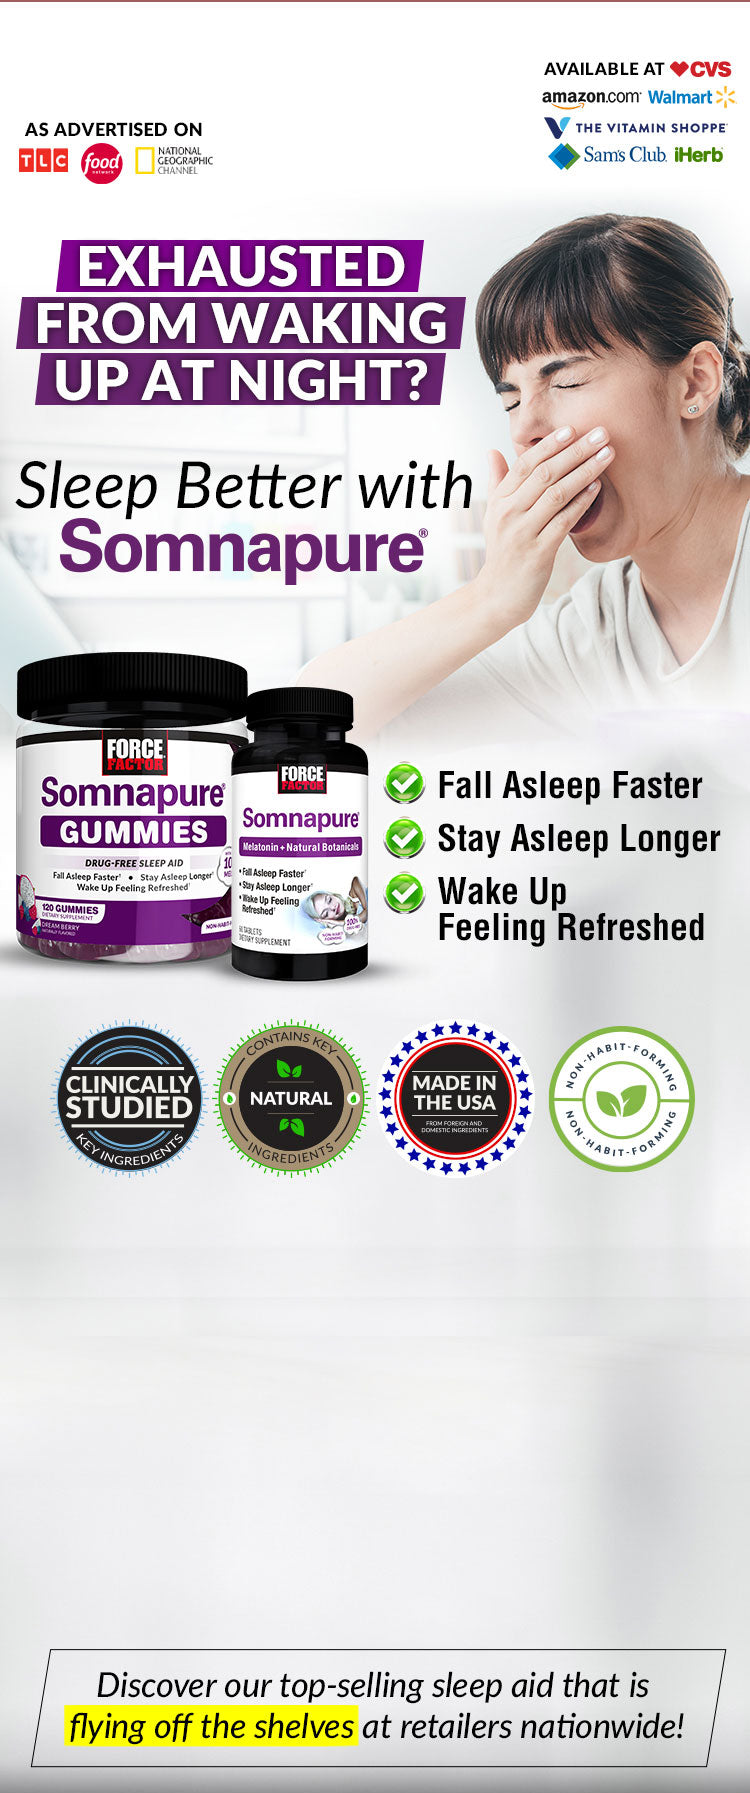 EXHAUSTED FROM WAKING UP AT NIGHT? Sleep Better with Somnapure®. Fall Asleep Longer, Stay Asleep Longer, Wake Up Feeling Refreshed. Discover our top-selling sleep aid that is flying off the shelves at retailers nationwide!